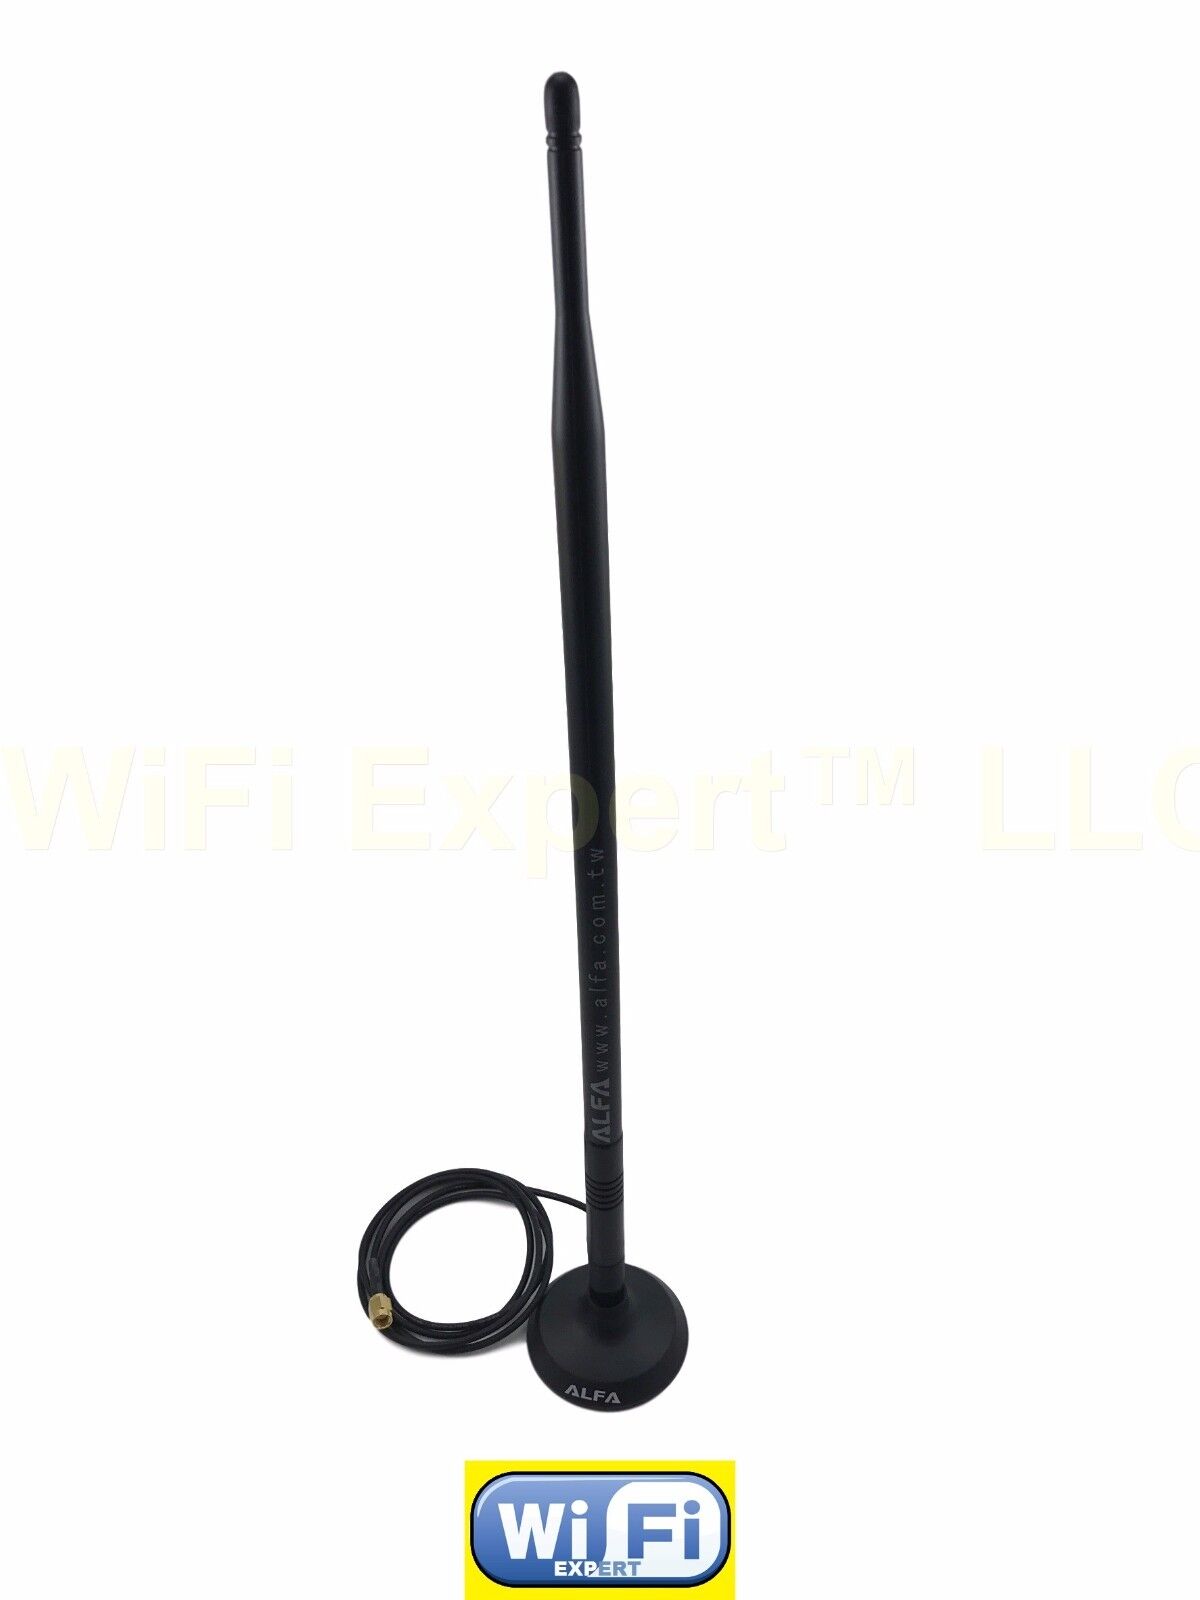 Alfa ARS-N19 omni directional 9 dBi antenna + ARS-AS01 magnetic base with 3 foot